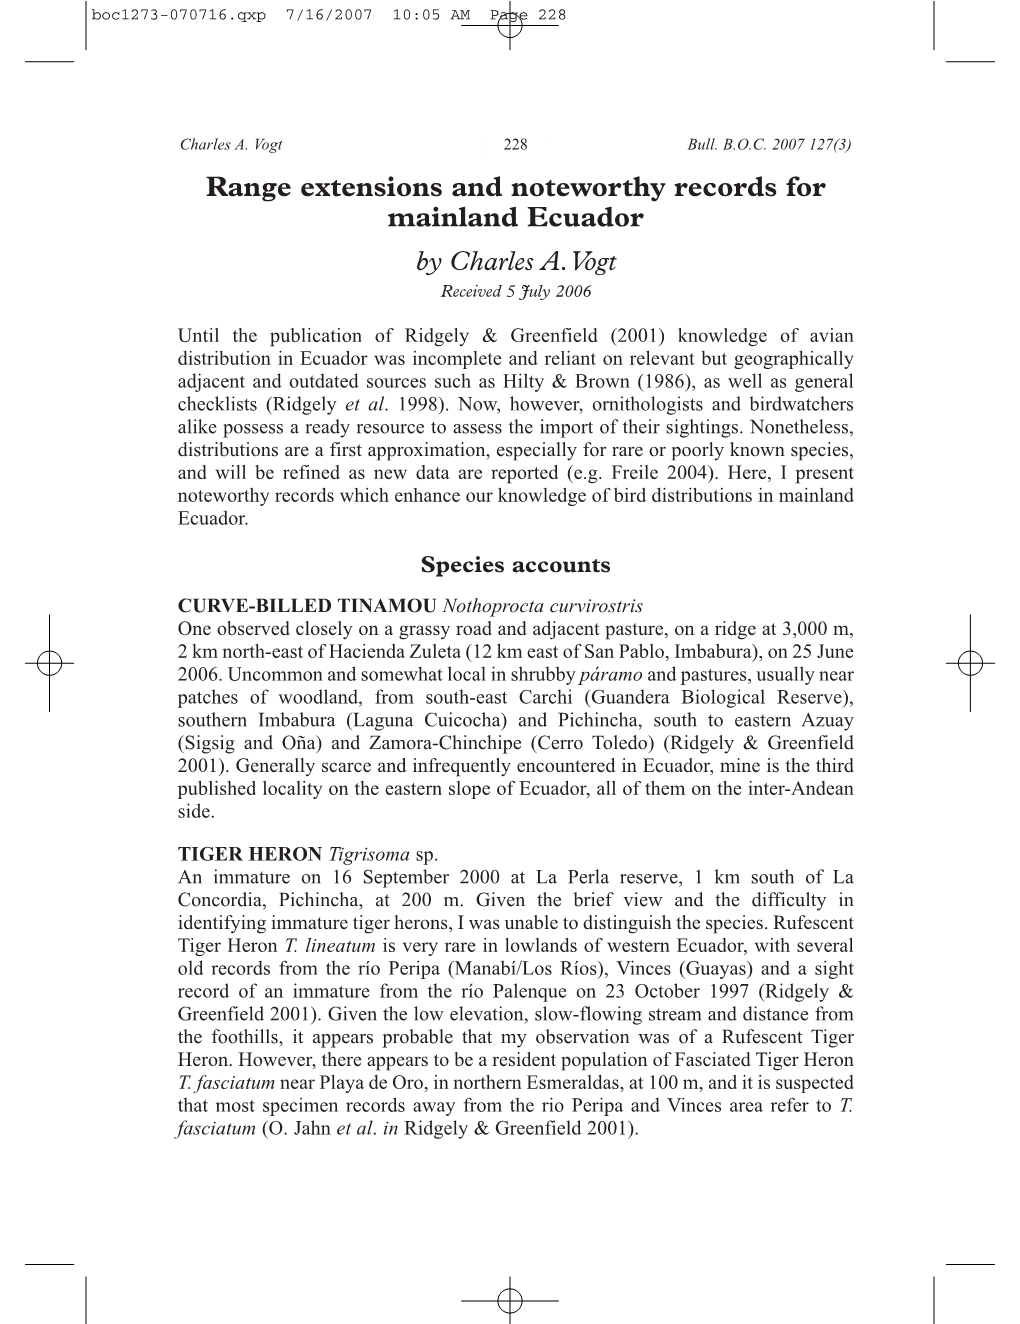 Range Extensions and Noteworthy Records for Mainland Ecuador by Charles A.Vogt Received 5 July 2006